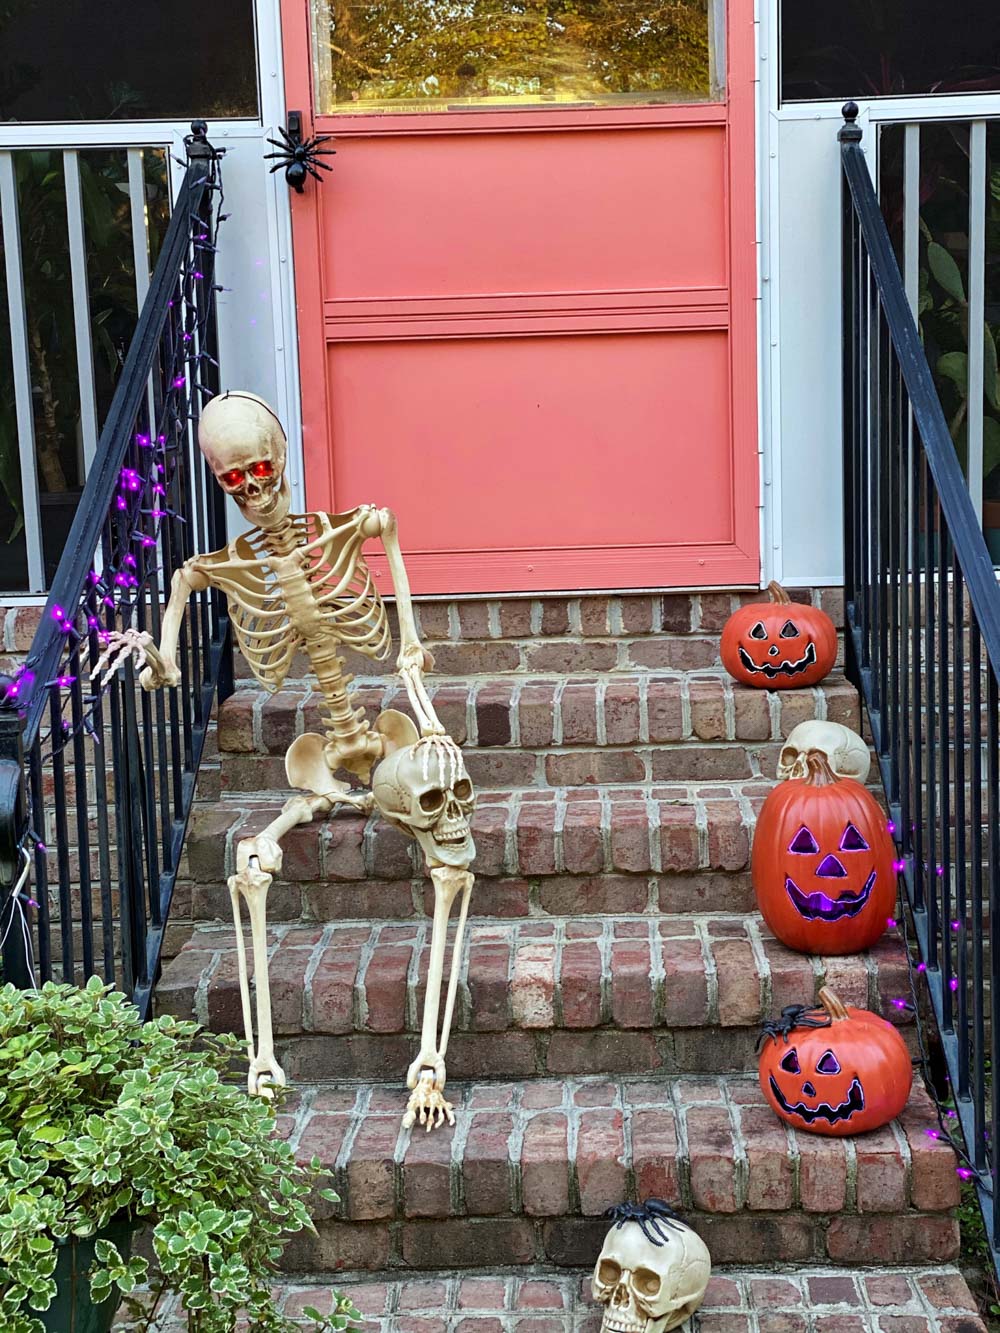 A skeleton and pumpkins sitting on a brick stairway in front of a pink door.